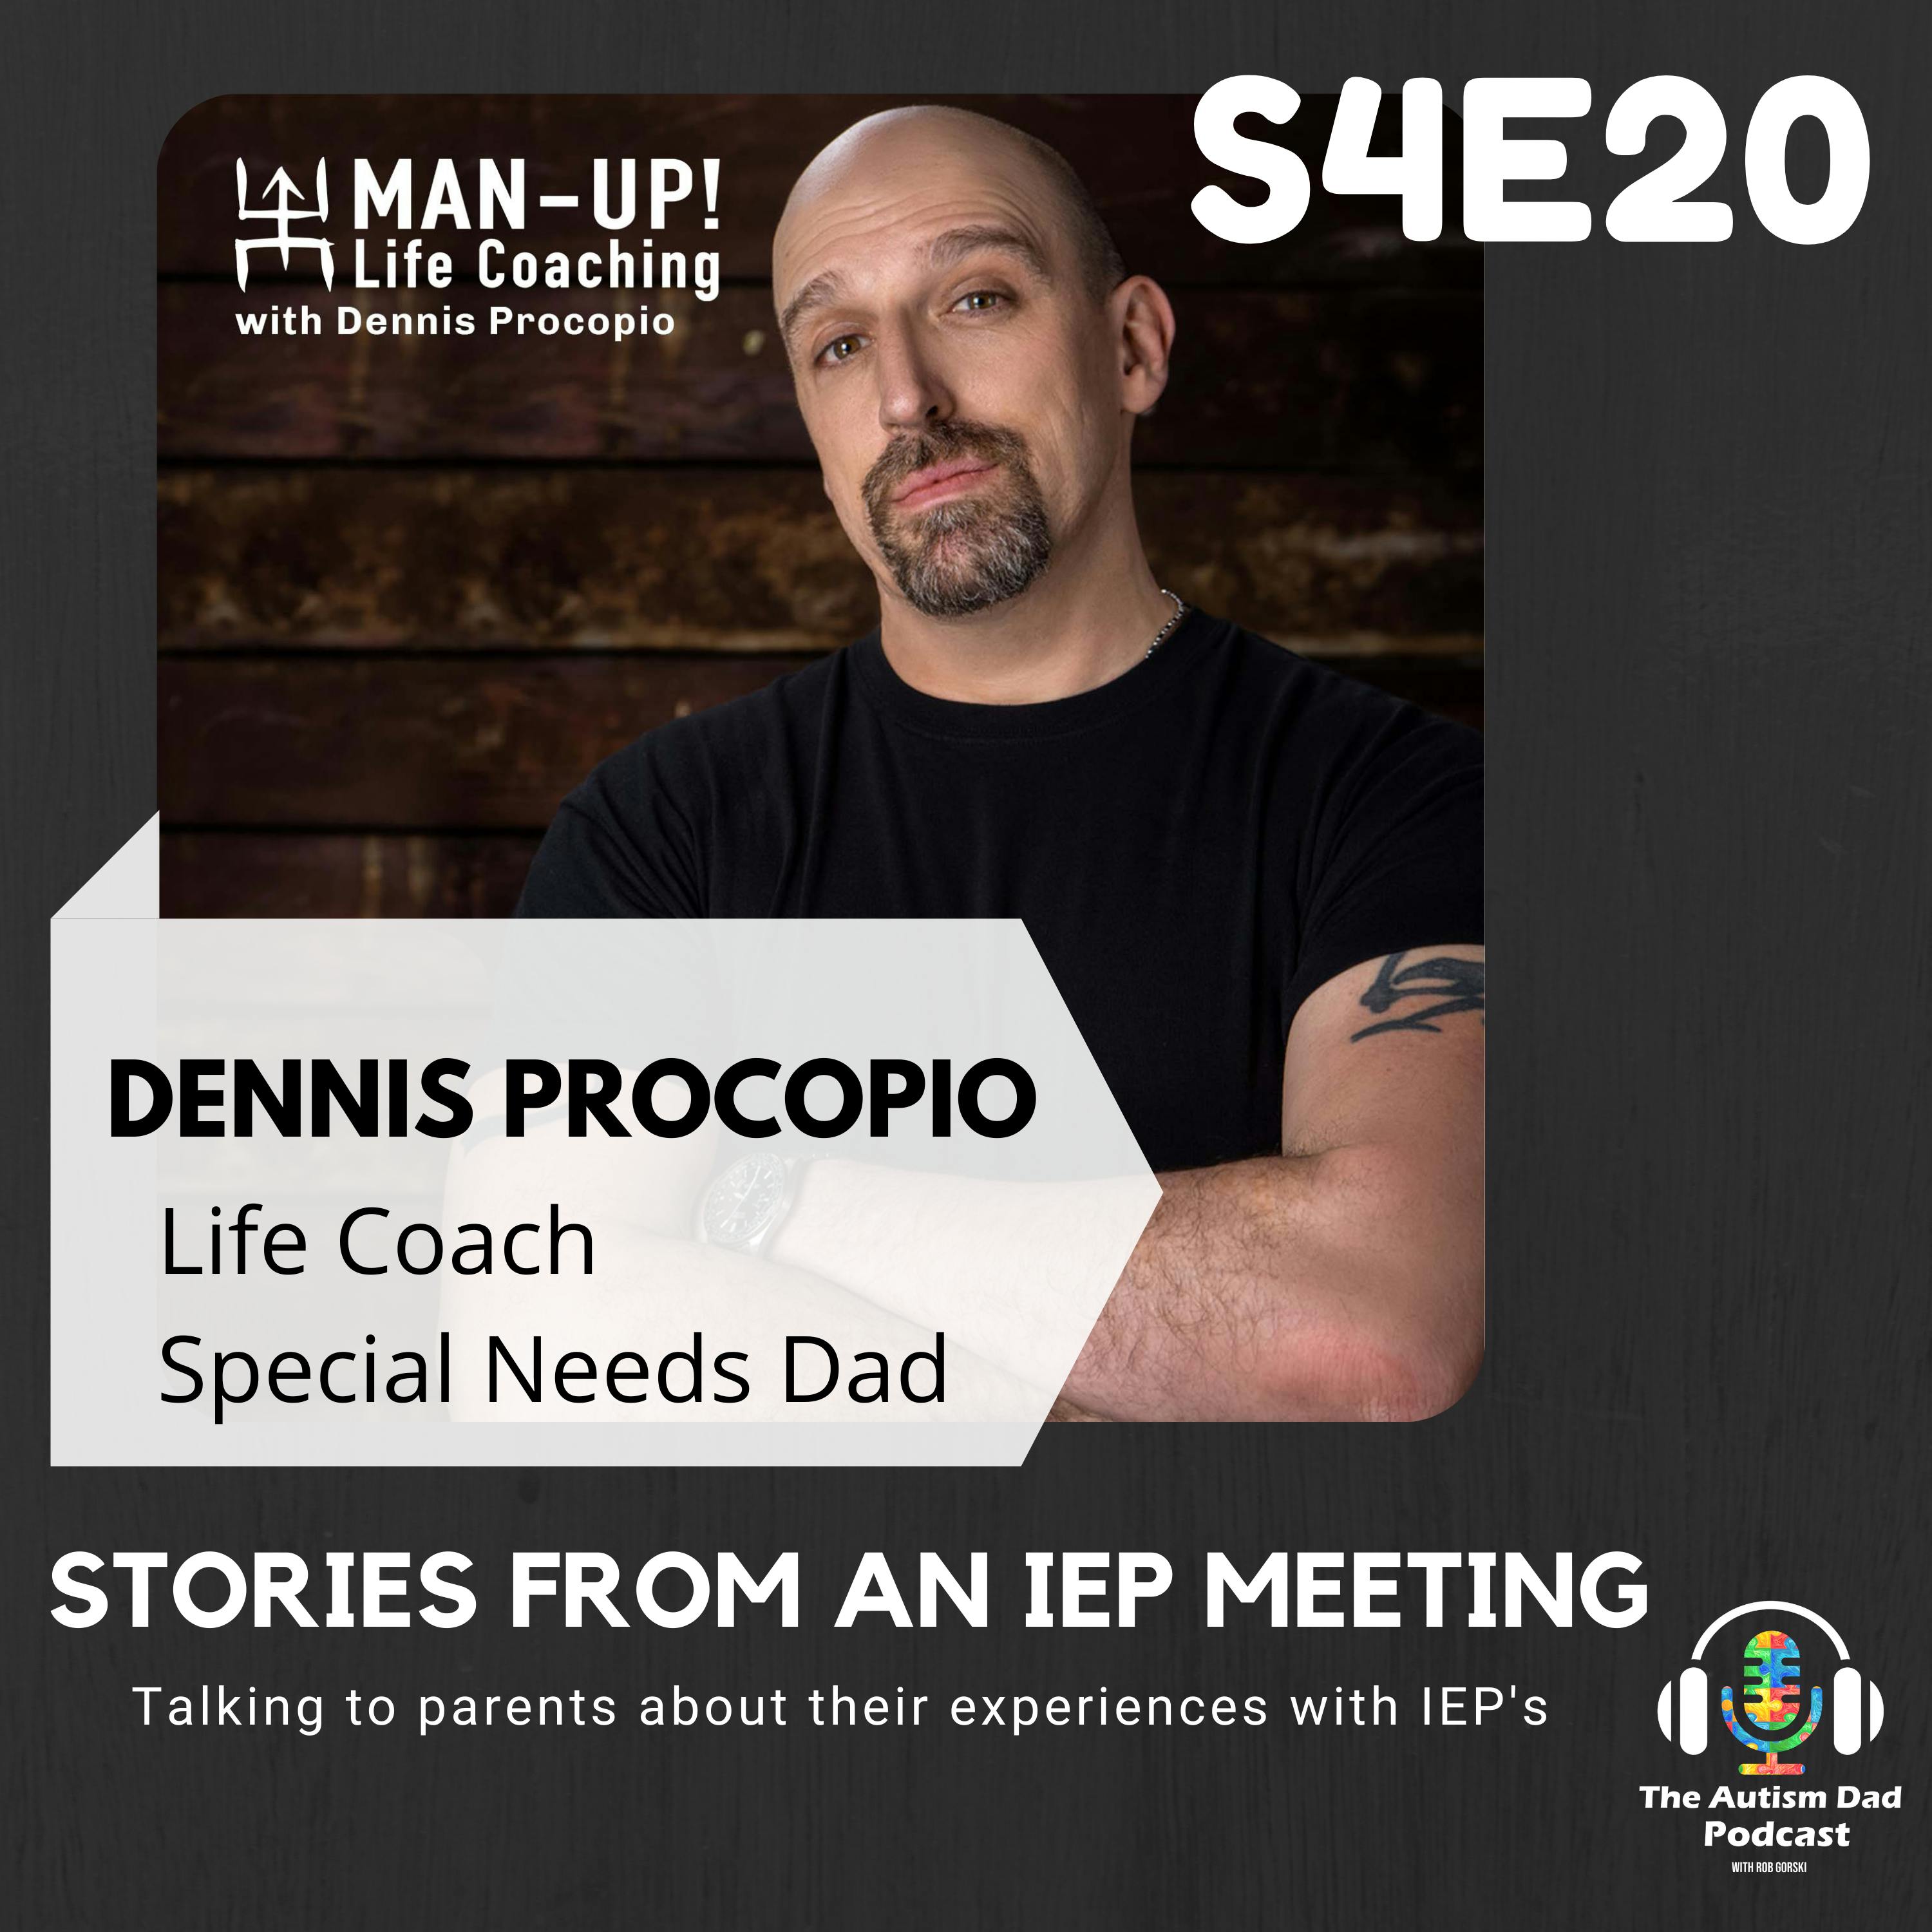 Stories from an IEP Meeting (feat. Dennis Procopio) S4E20 Image